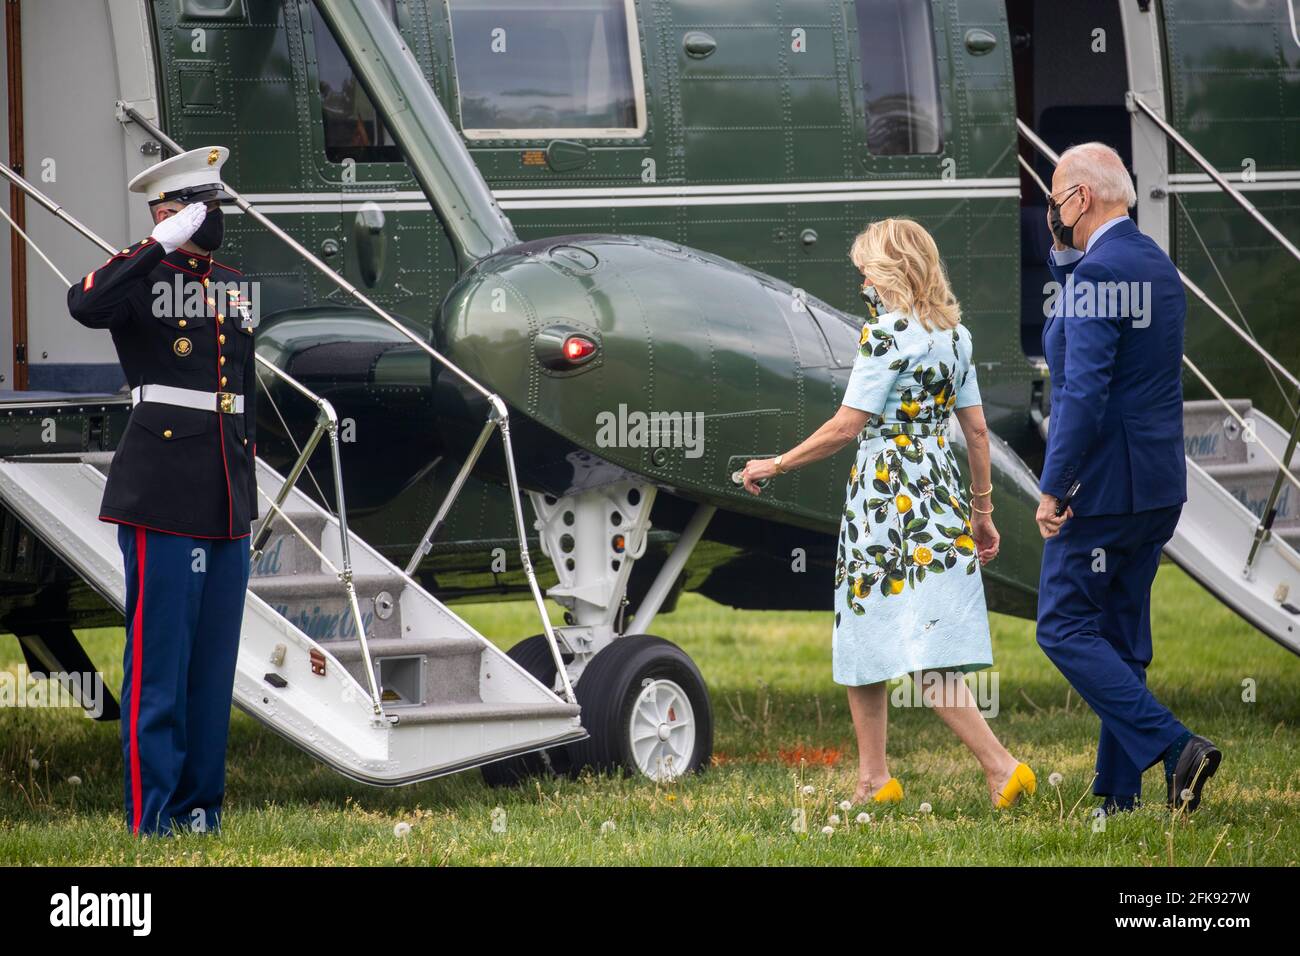 Washington, DC, USA. 29th Apr, 2021. US President Joe Biden and First Lady Jill Biden walk to board Marine One on the Ellipse of the White House in Washington, DC, USA, 29 April 2021. President Biden is traveling to Georgia today for an event to mark his 100th day in office and to pay a visit to former US President Jimmy Carter.Credit: Shawn Thew/Pool via CNP | usage worldwide Credit: dpa/Alamy Live News Stock Photo